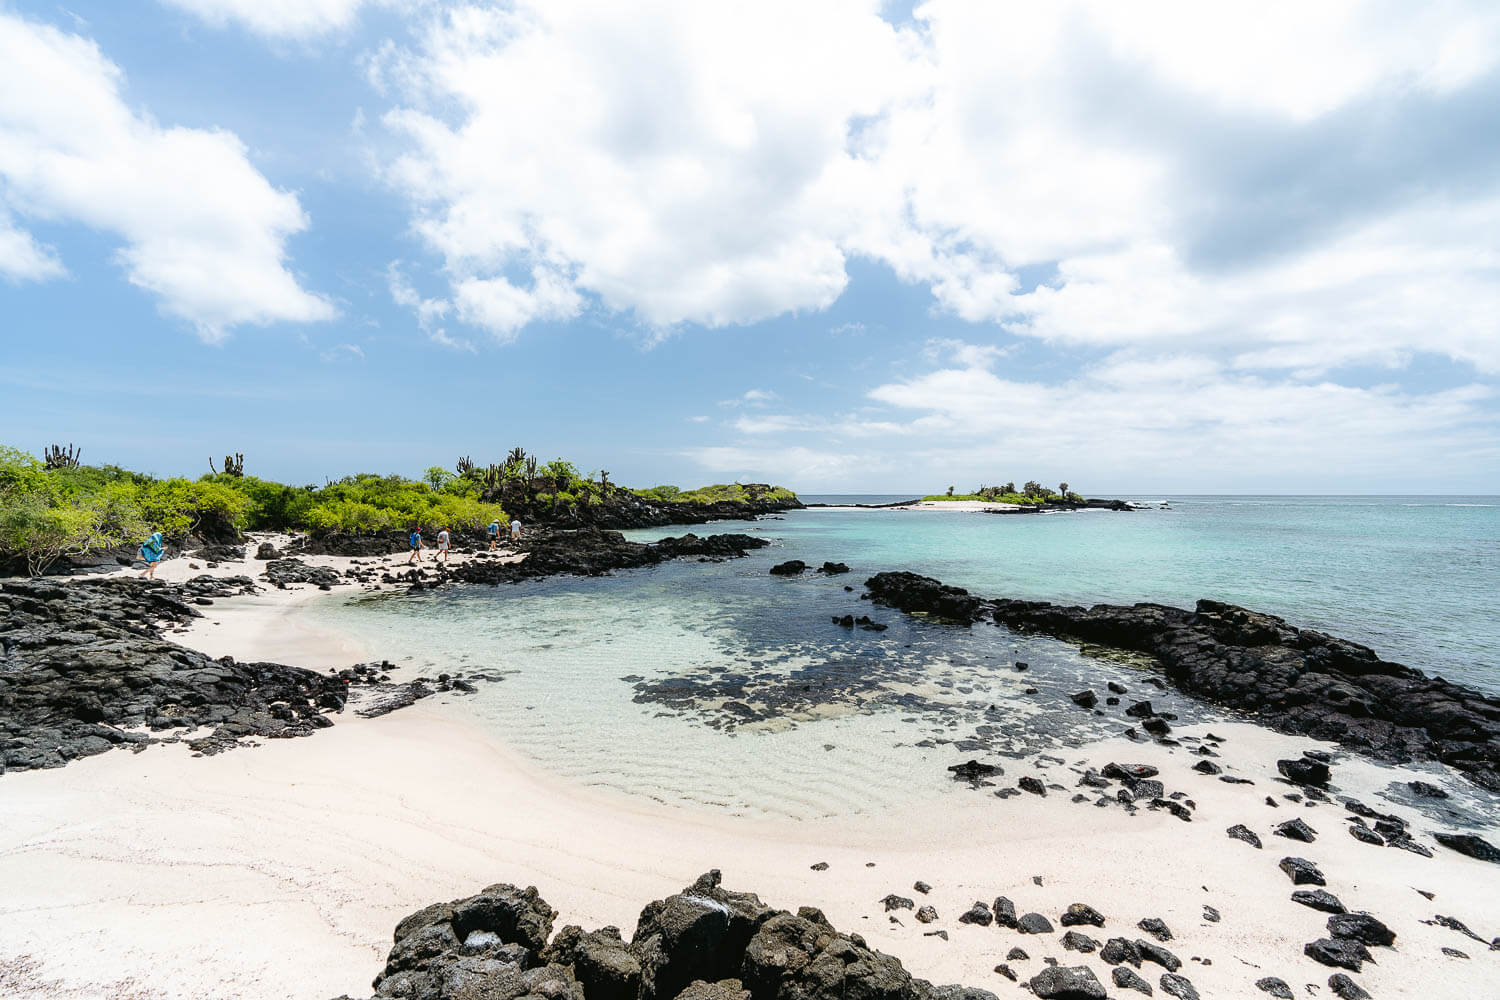 Loberia beach in Floreana Island - one of the best beaches in the Galapagos